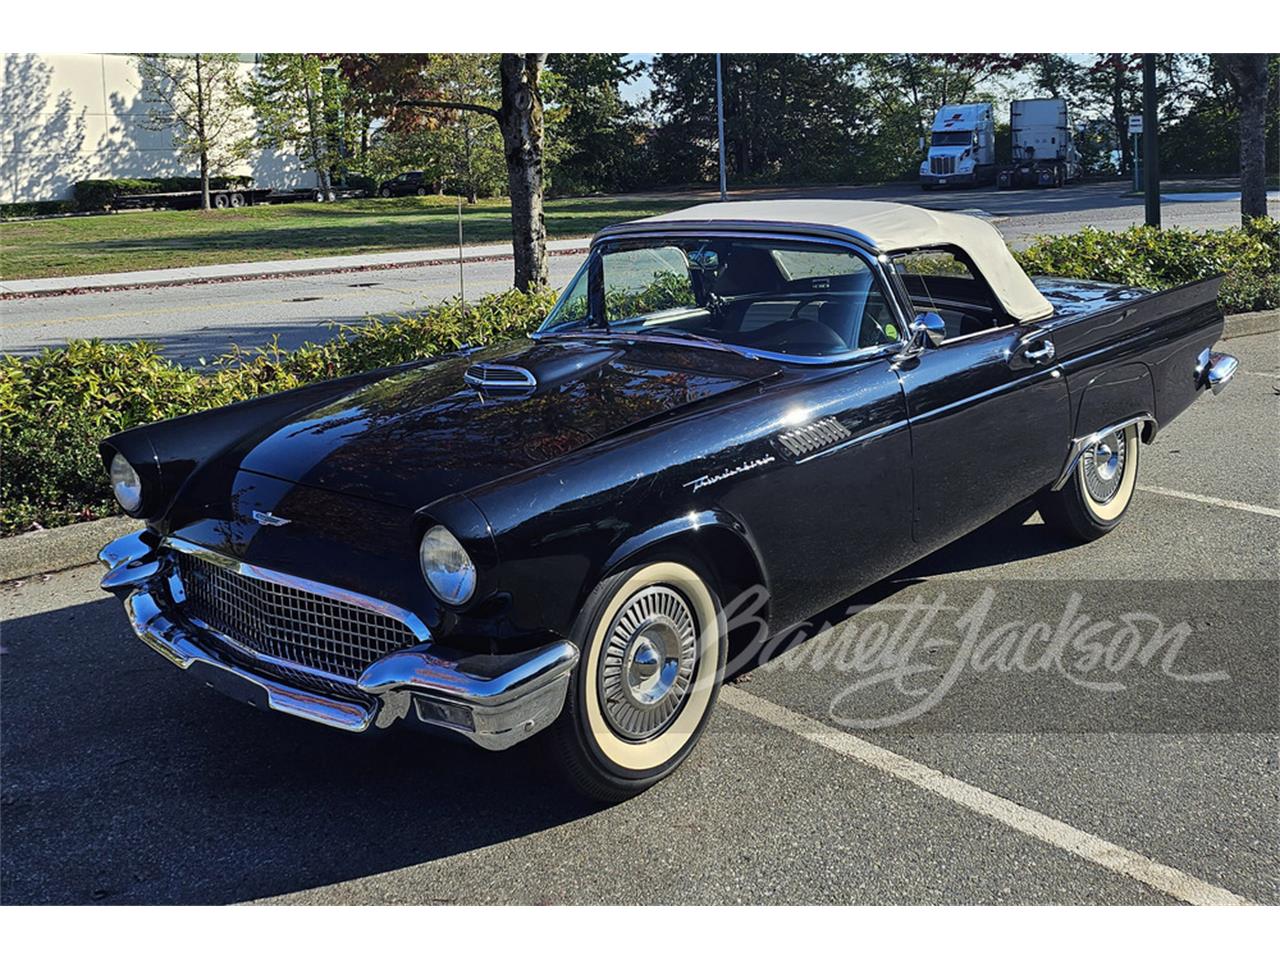 For Sale at Auction: 1957 Ford Thunderbird in Scottsdale, Arizona for sale in Scottsdale, AZ